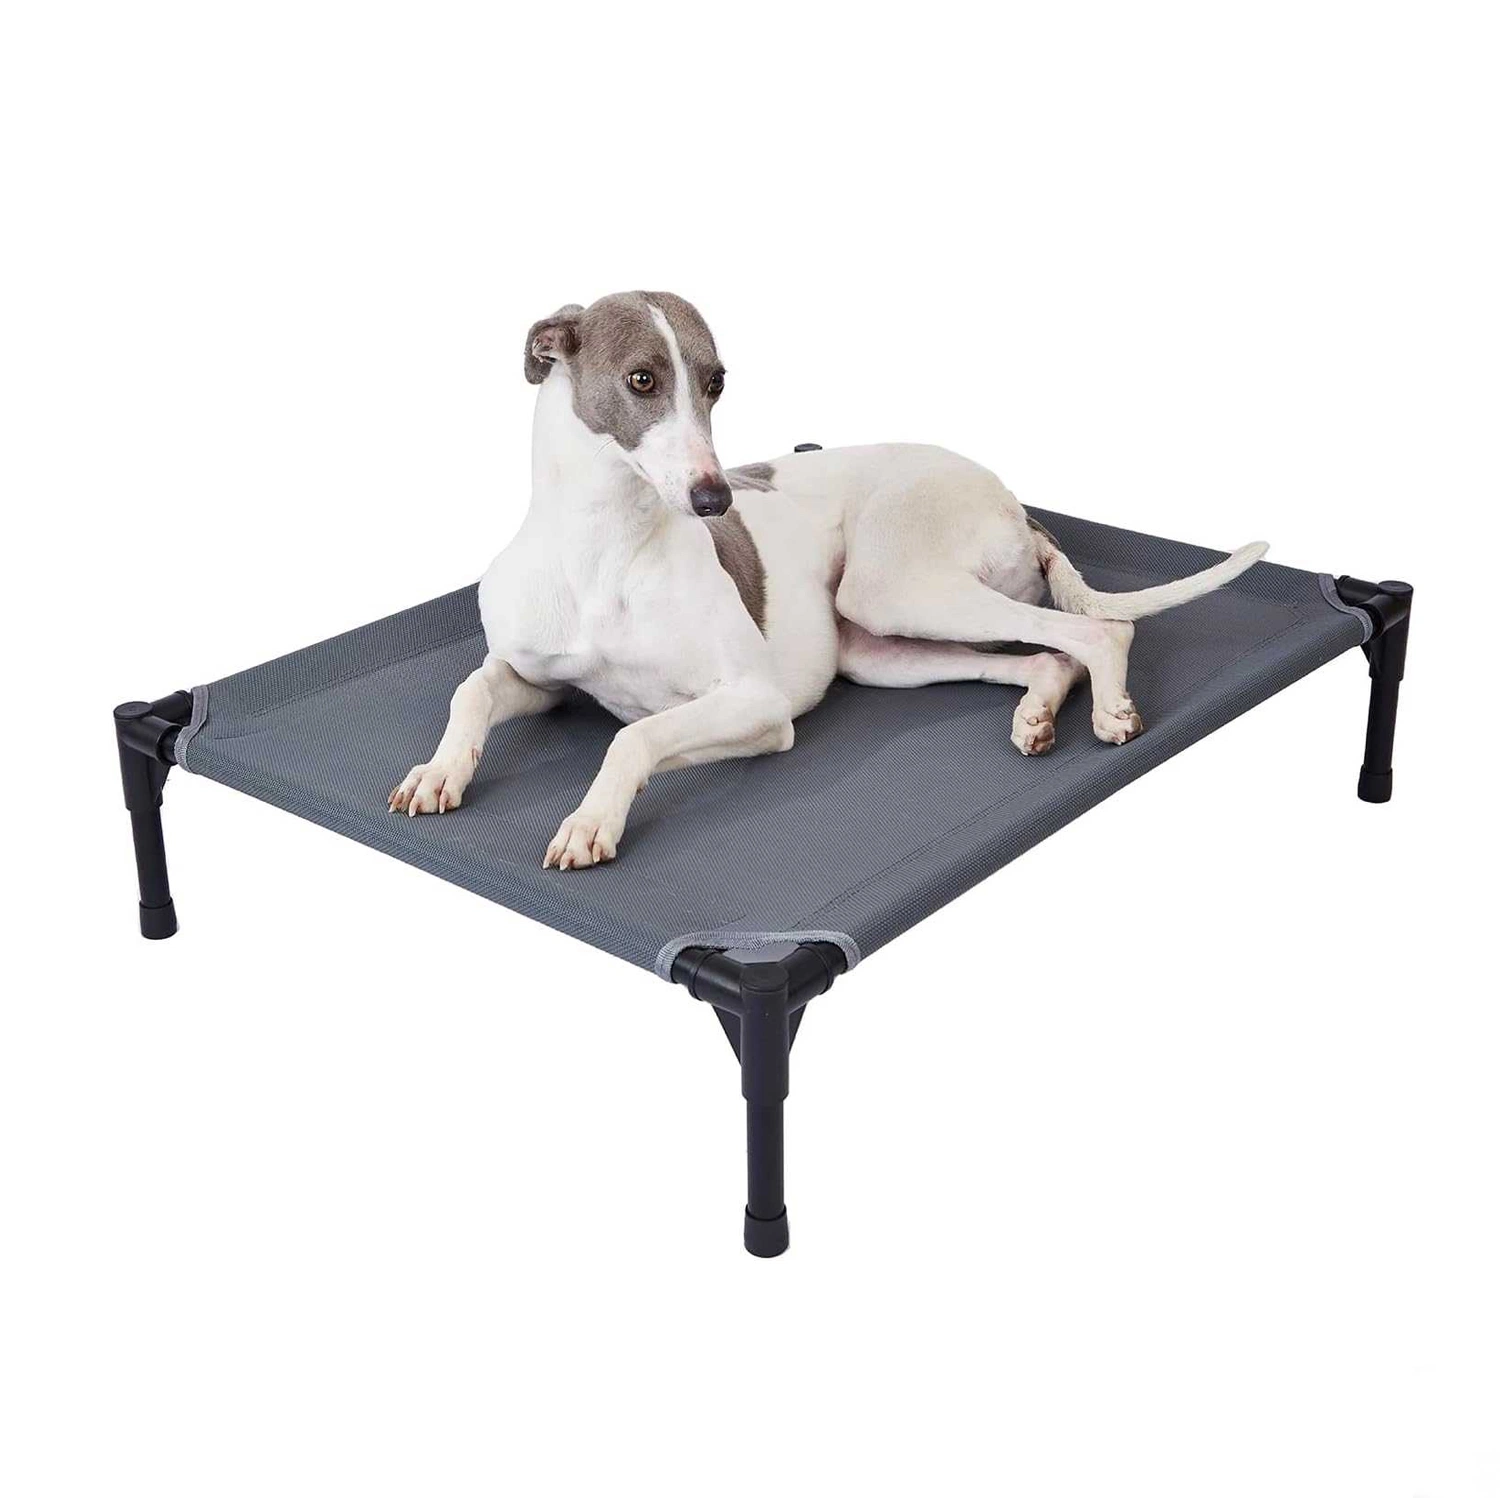 Pet Elevated Dog Bed Iron Frame Mesh Fabric Pet Bear Heavy Weight